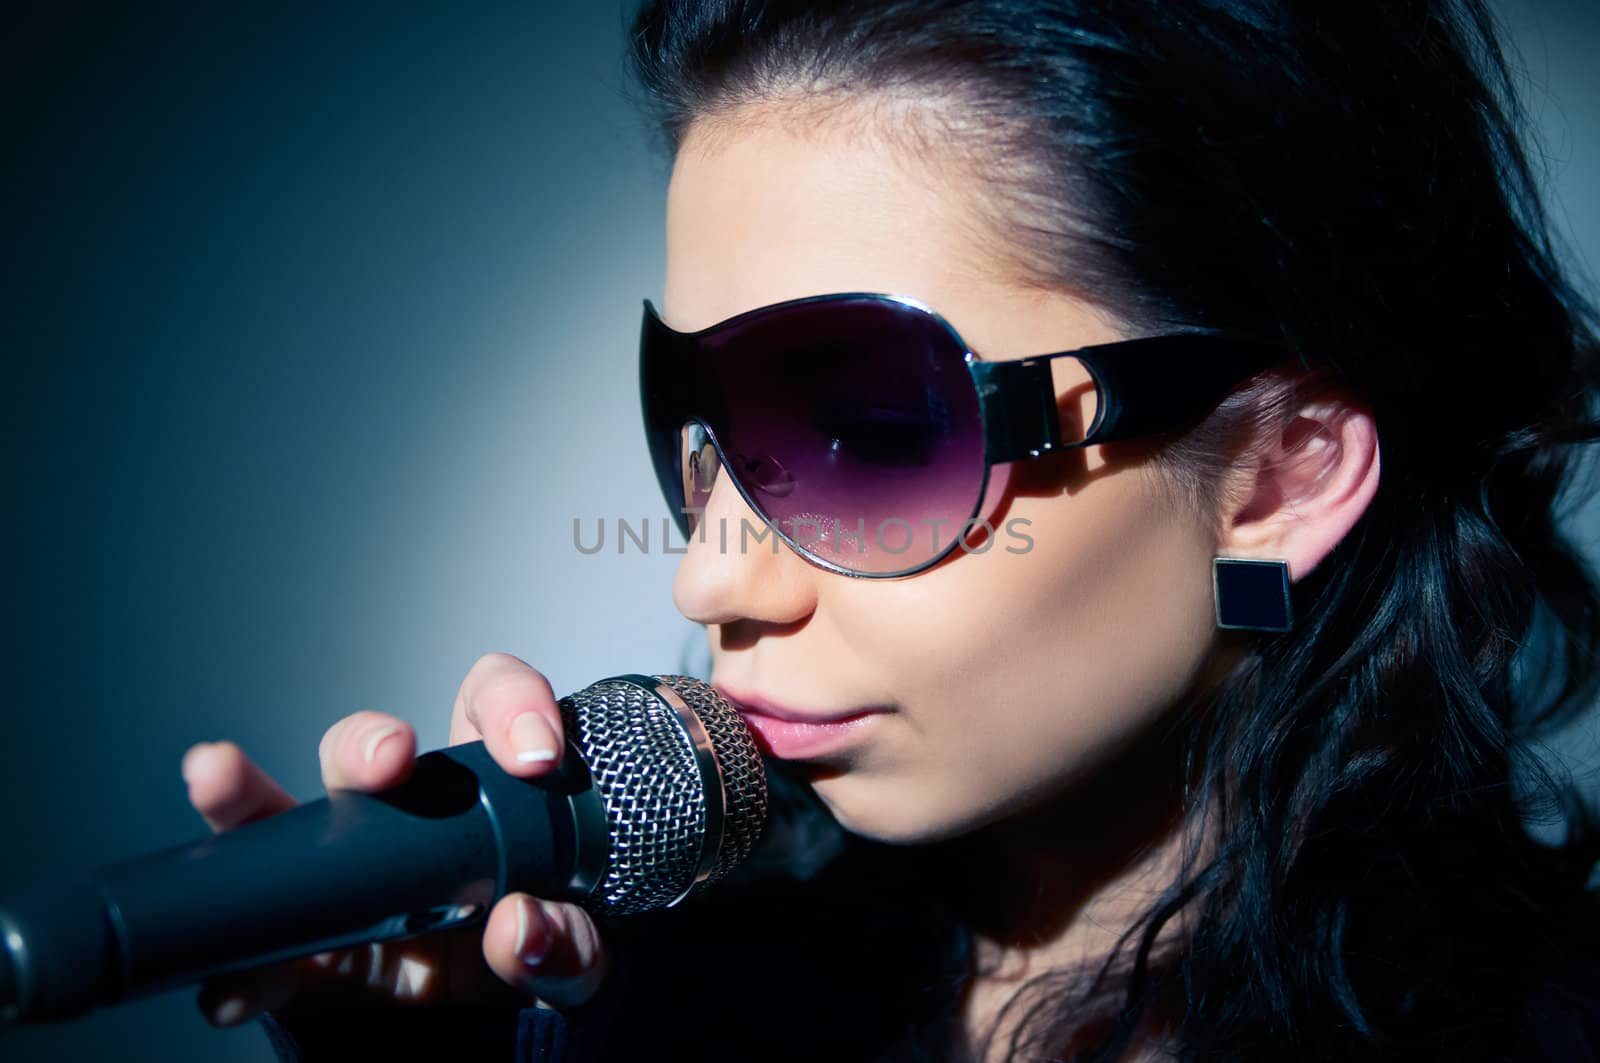 Girl Singing. Close-up of a young woman singing on stage